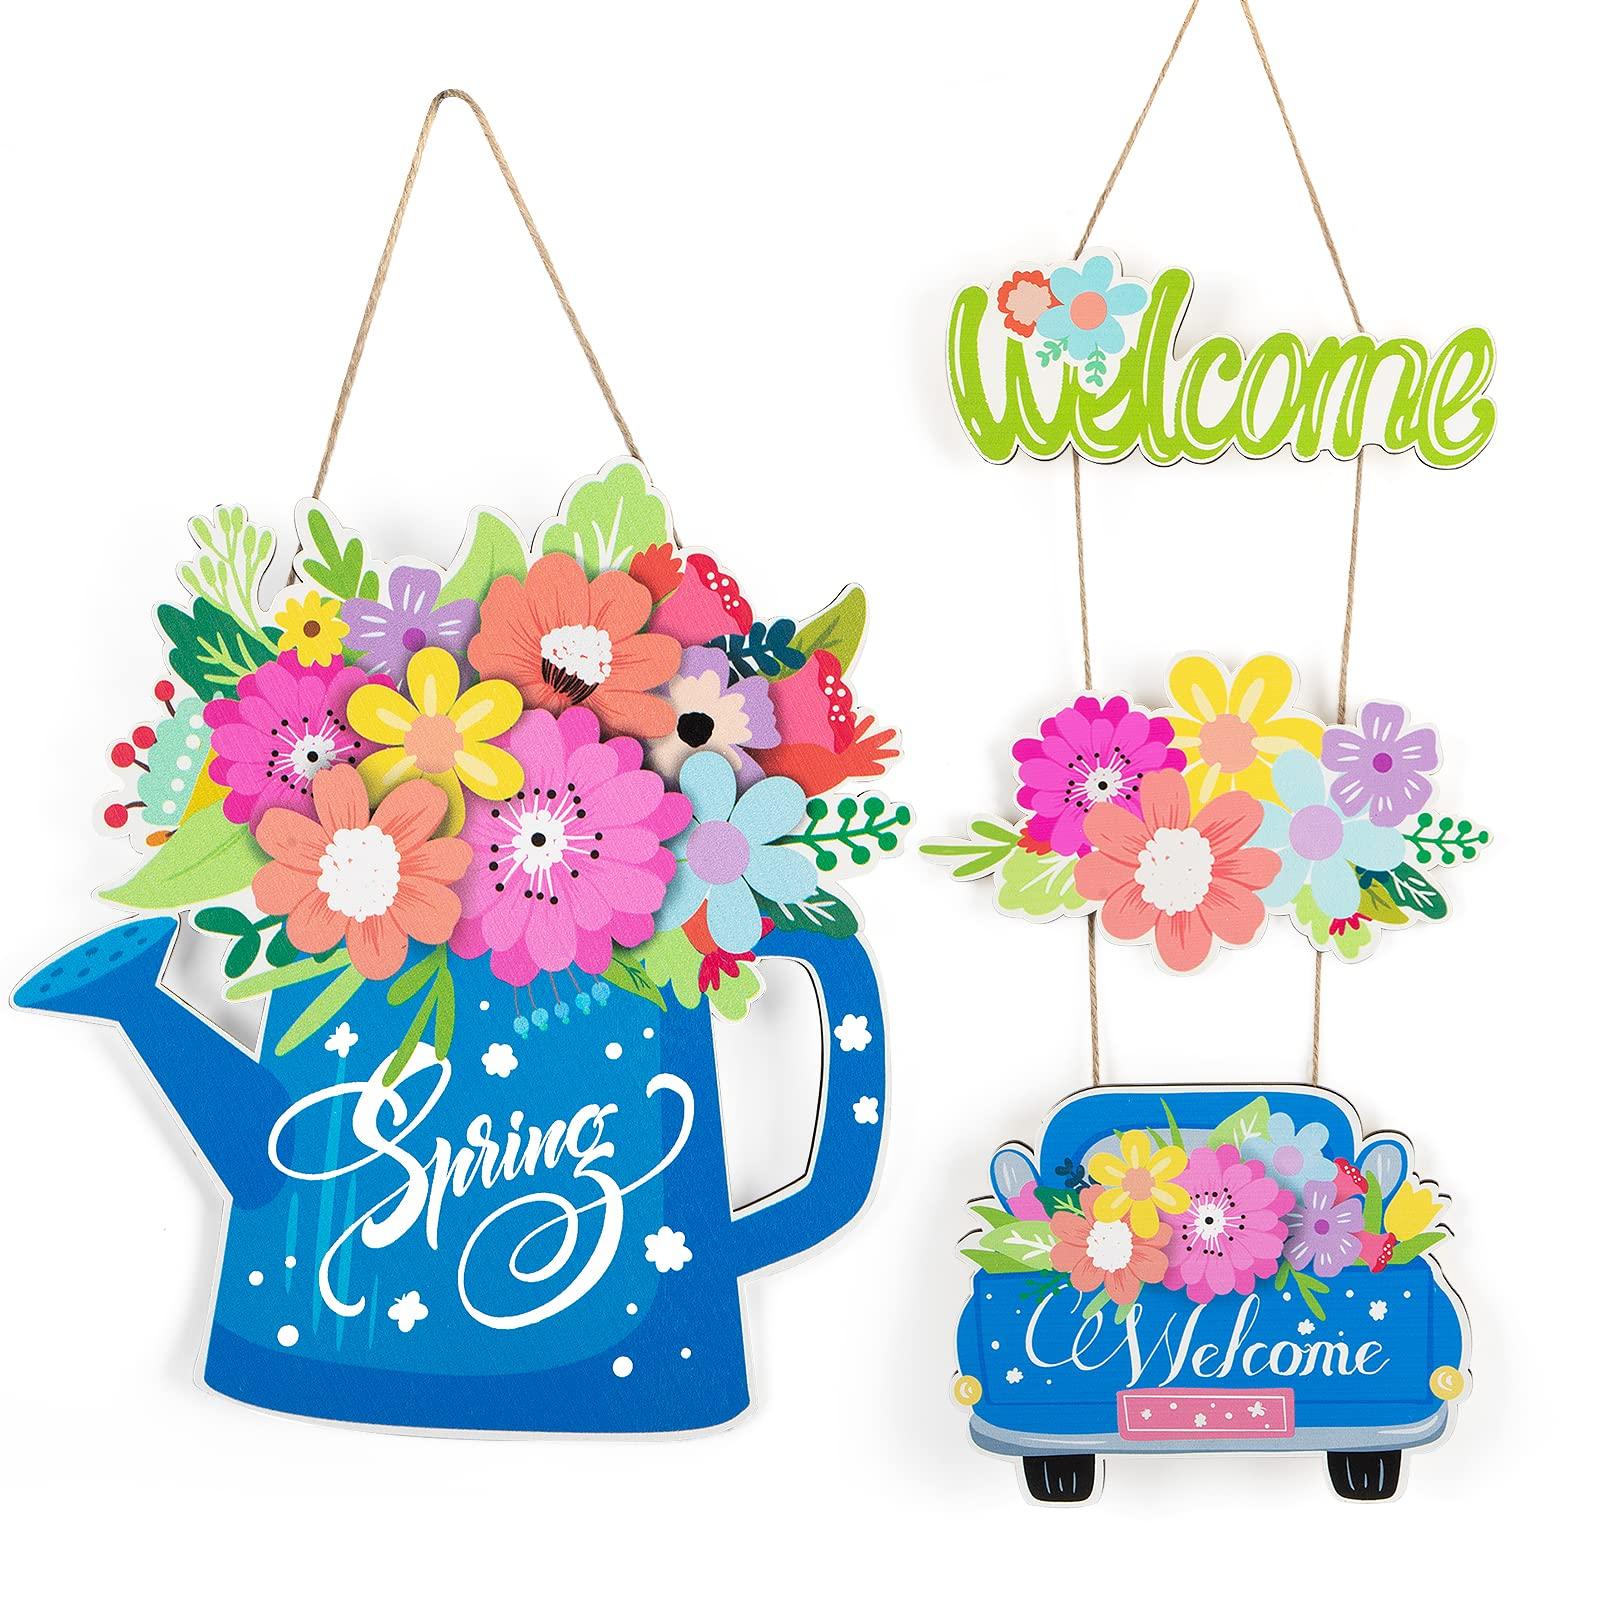 Sophena 2 Pieces Spring Decorations Welcome Door Hanger Sign For Front Door Hello Spring Home Sign, Blue Watering Can Truck Flower Wooden Sign Wall Art Decor For Indoor Outdoor Home Yard Farmhouse